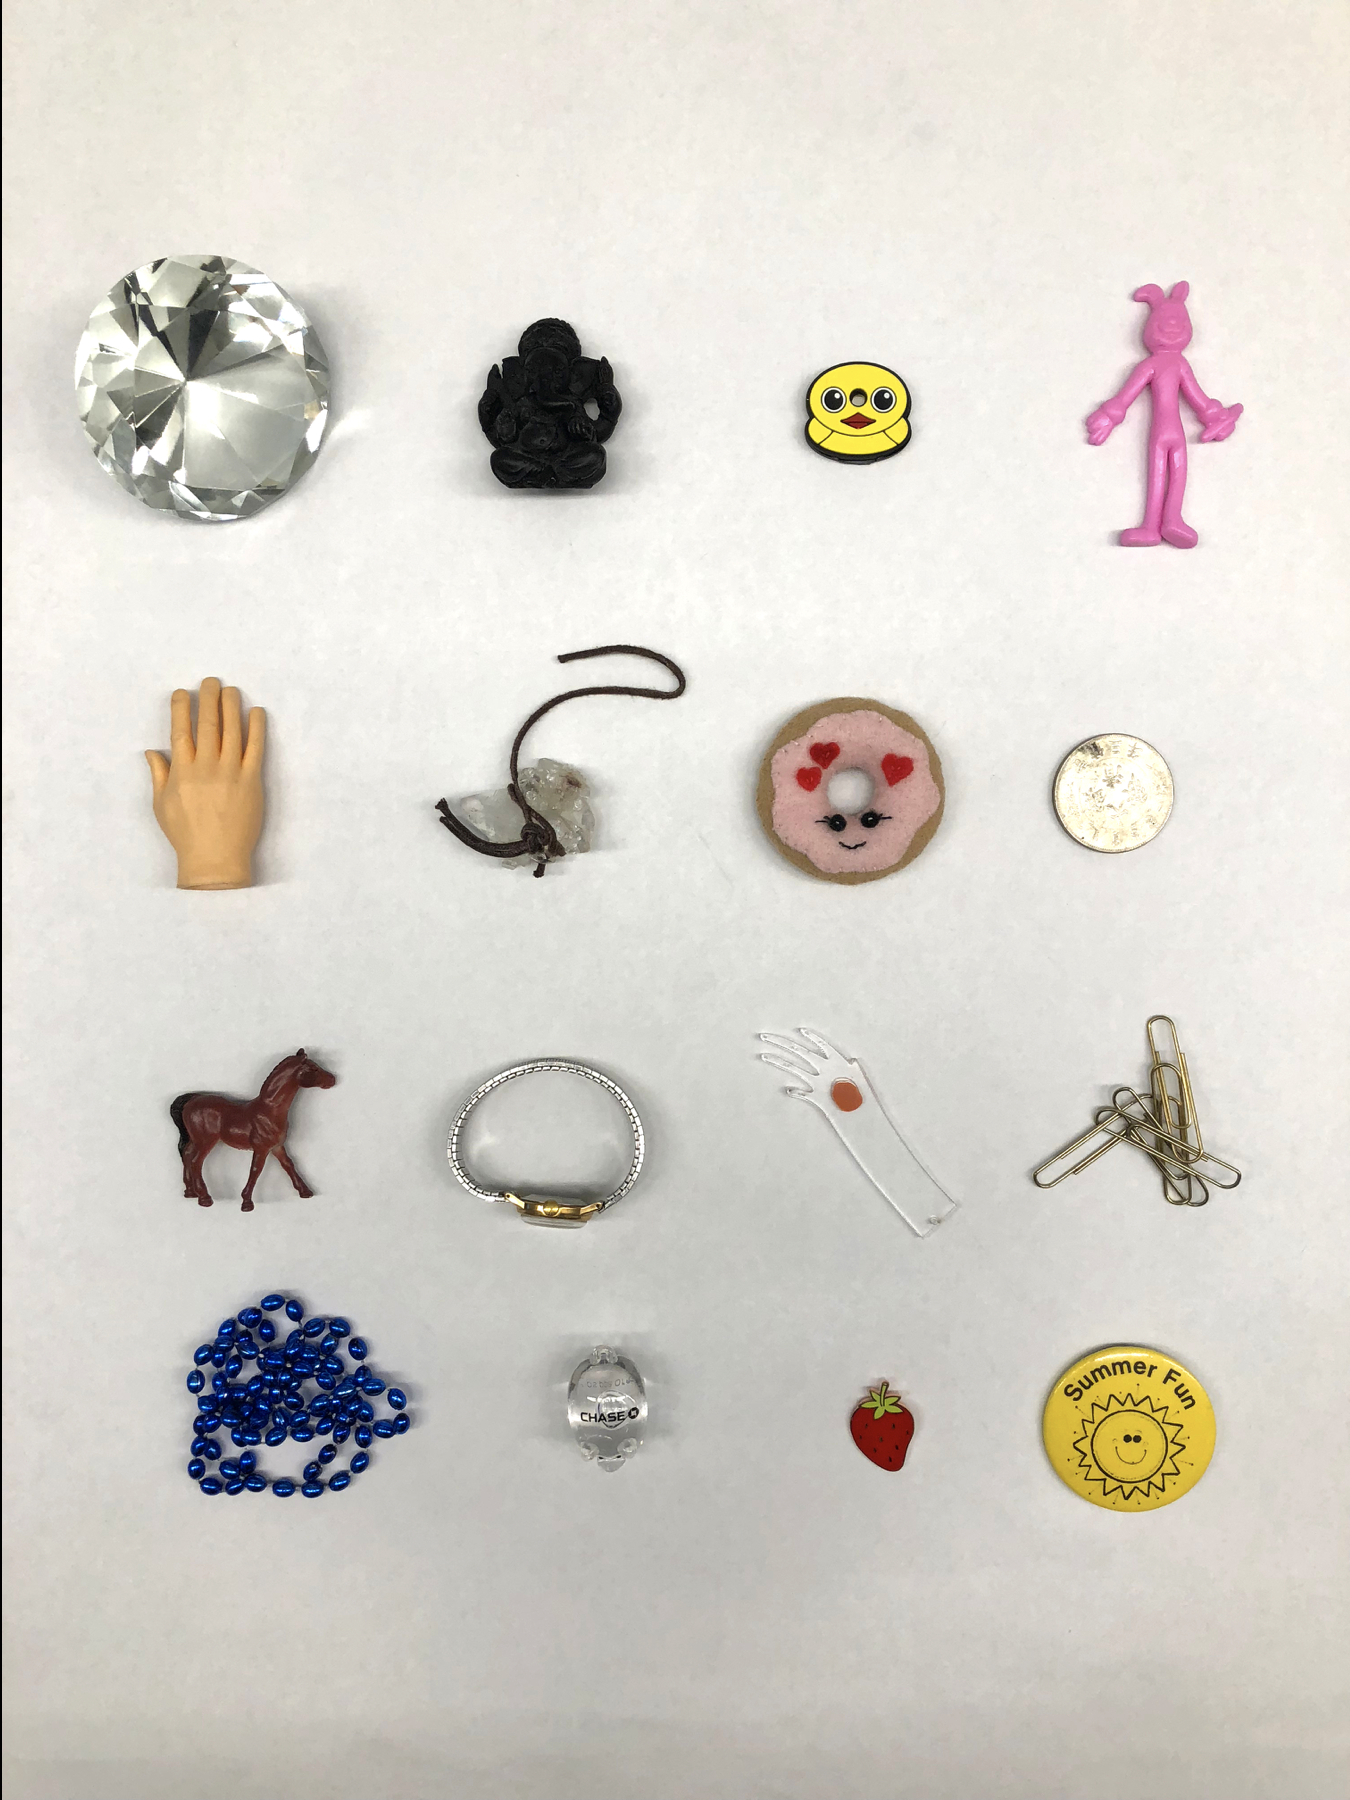 Exploring Materials: Creating Mood Boards with Objects